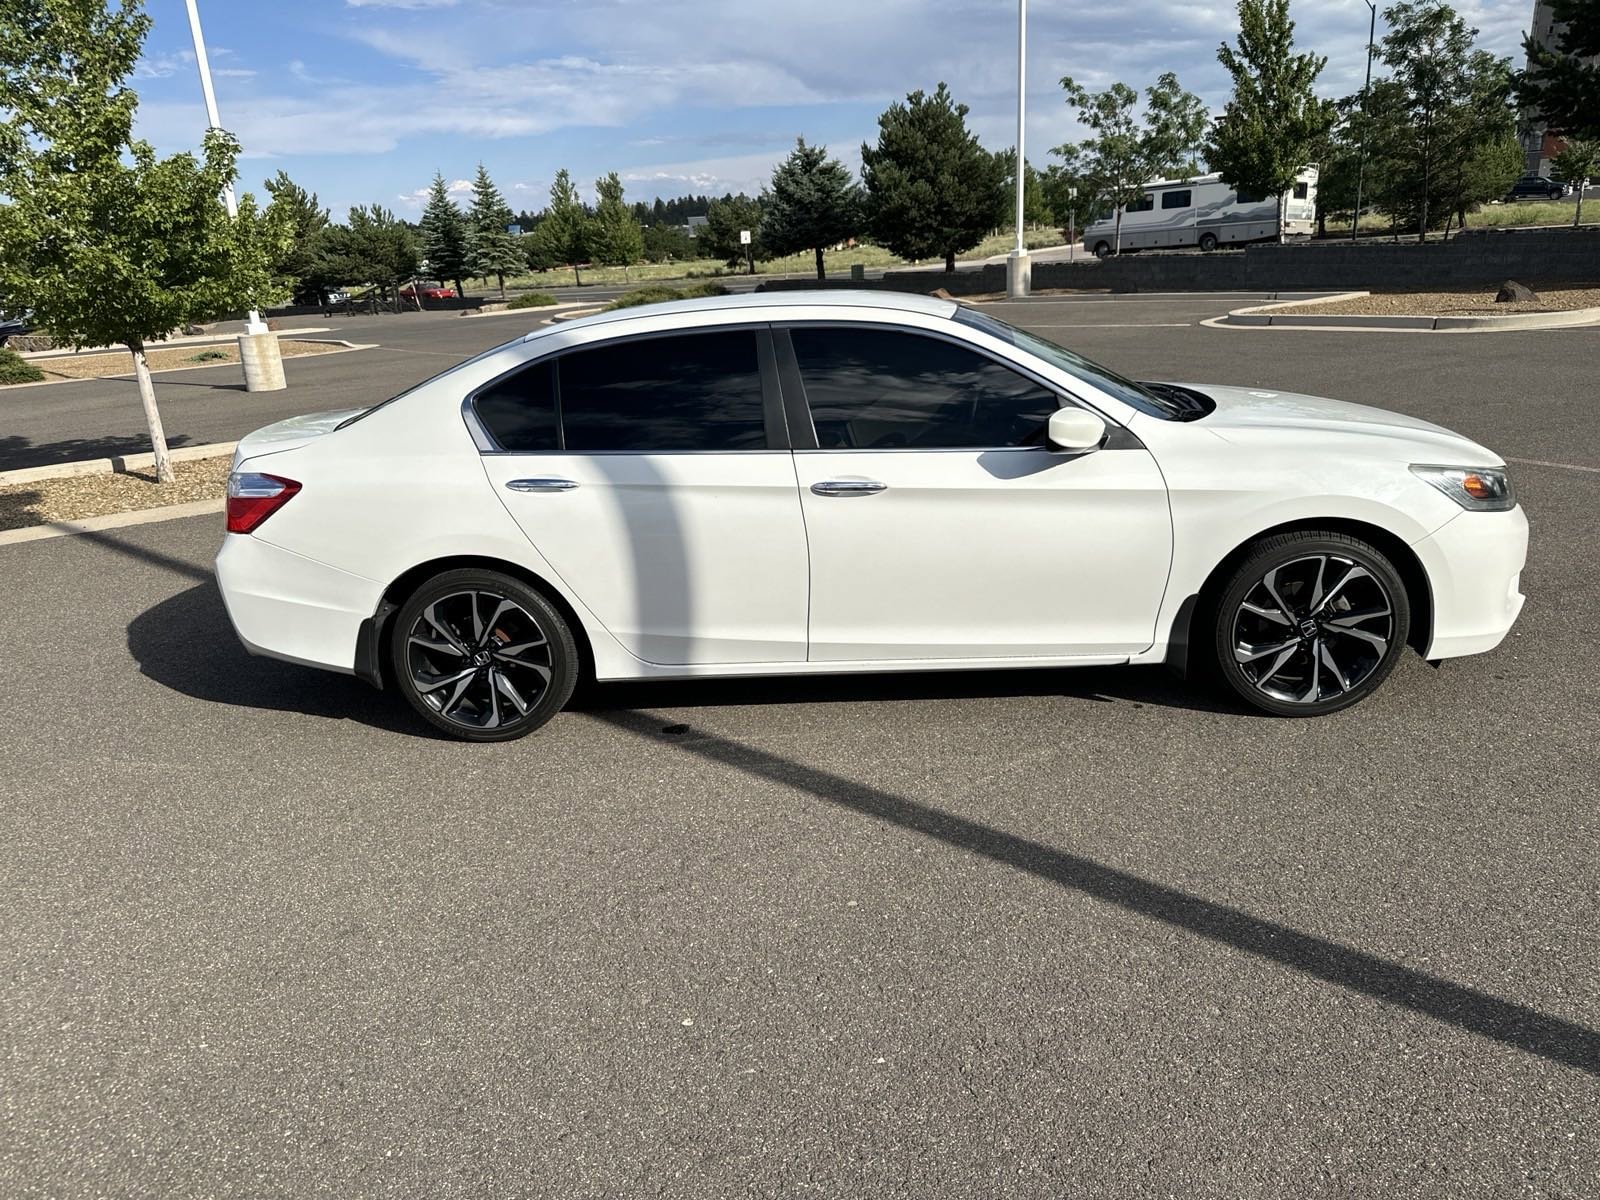 Used 2014 Honda Accord LX with VIN 1HGCR2F37EA232212 for sale in Flagstaff, AZ